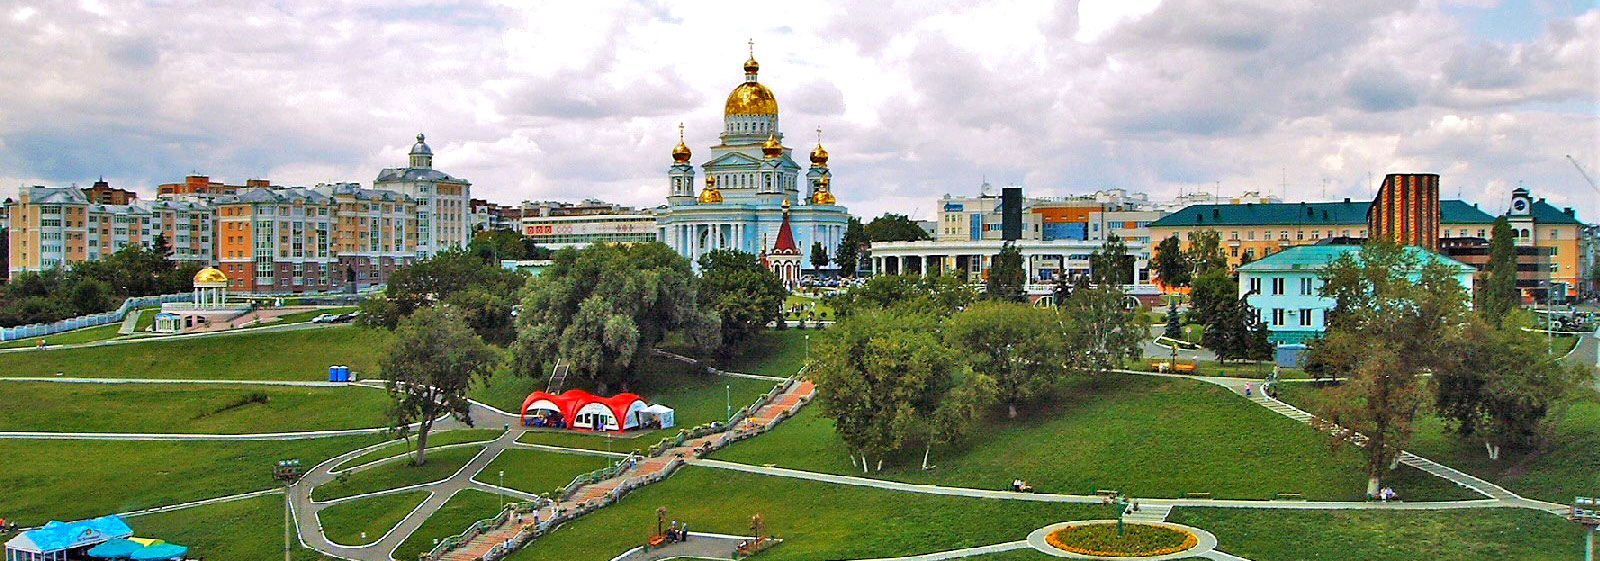 City of Saransk from Pushkin Park, Cathedral of St. Theodore Ushakov in center, Saransk, Russia